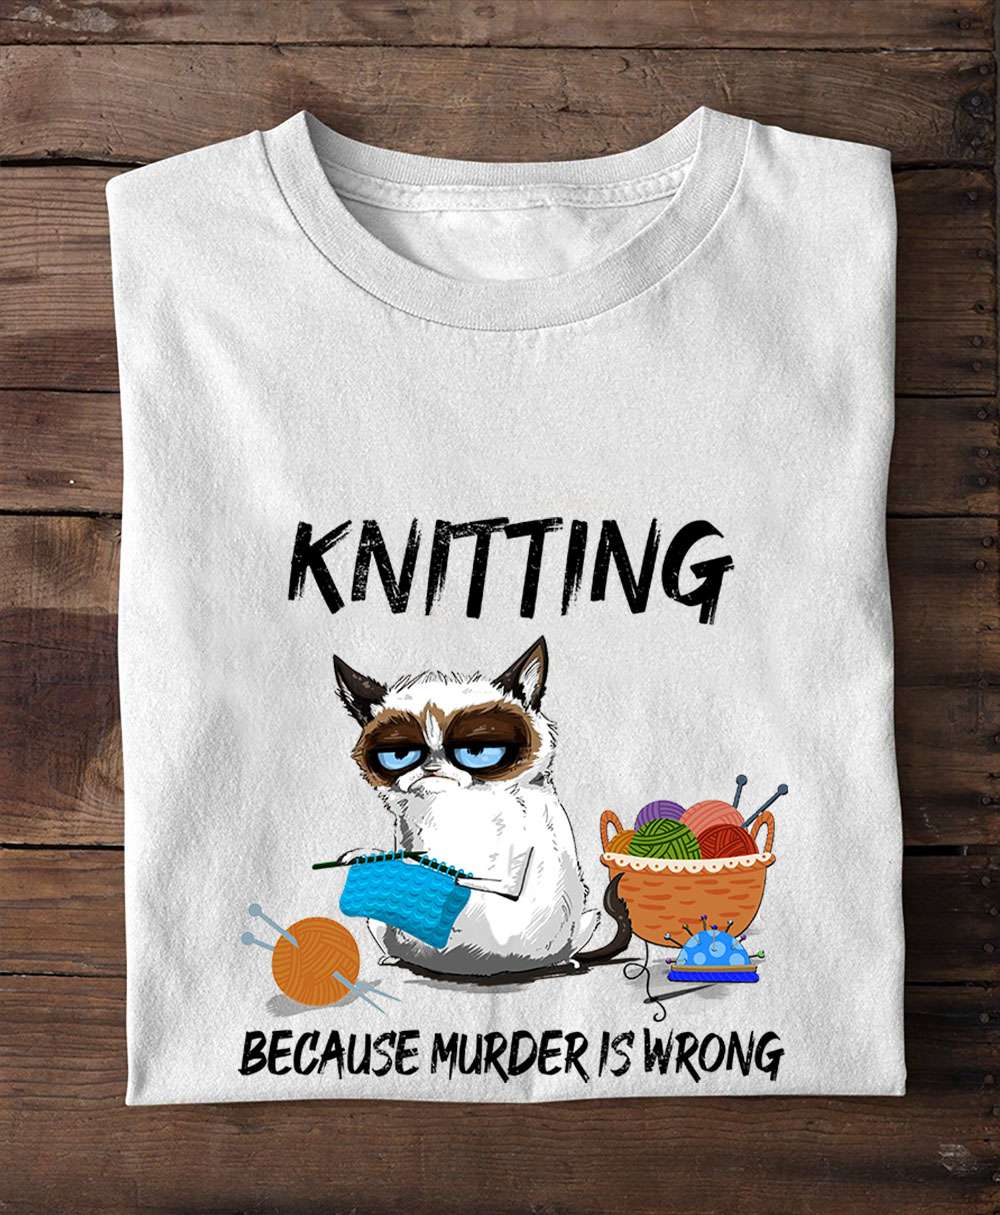 Knitting because murder is wrong - White cat knitting, knitting and cat